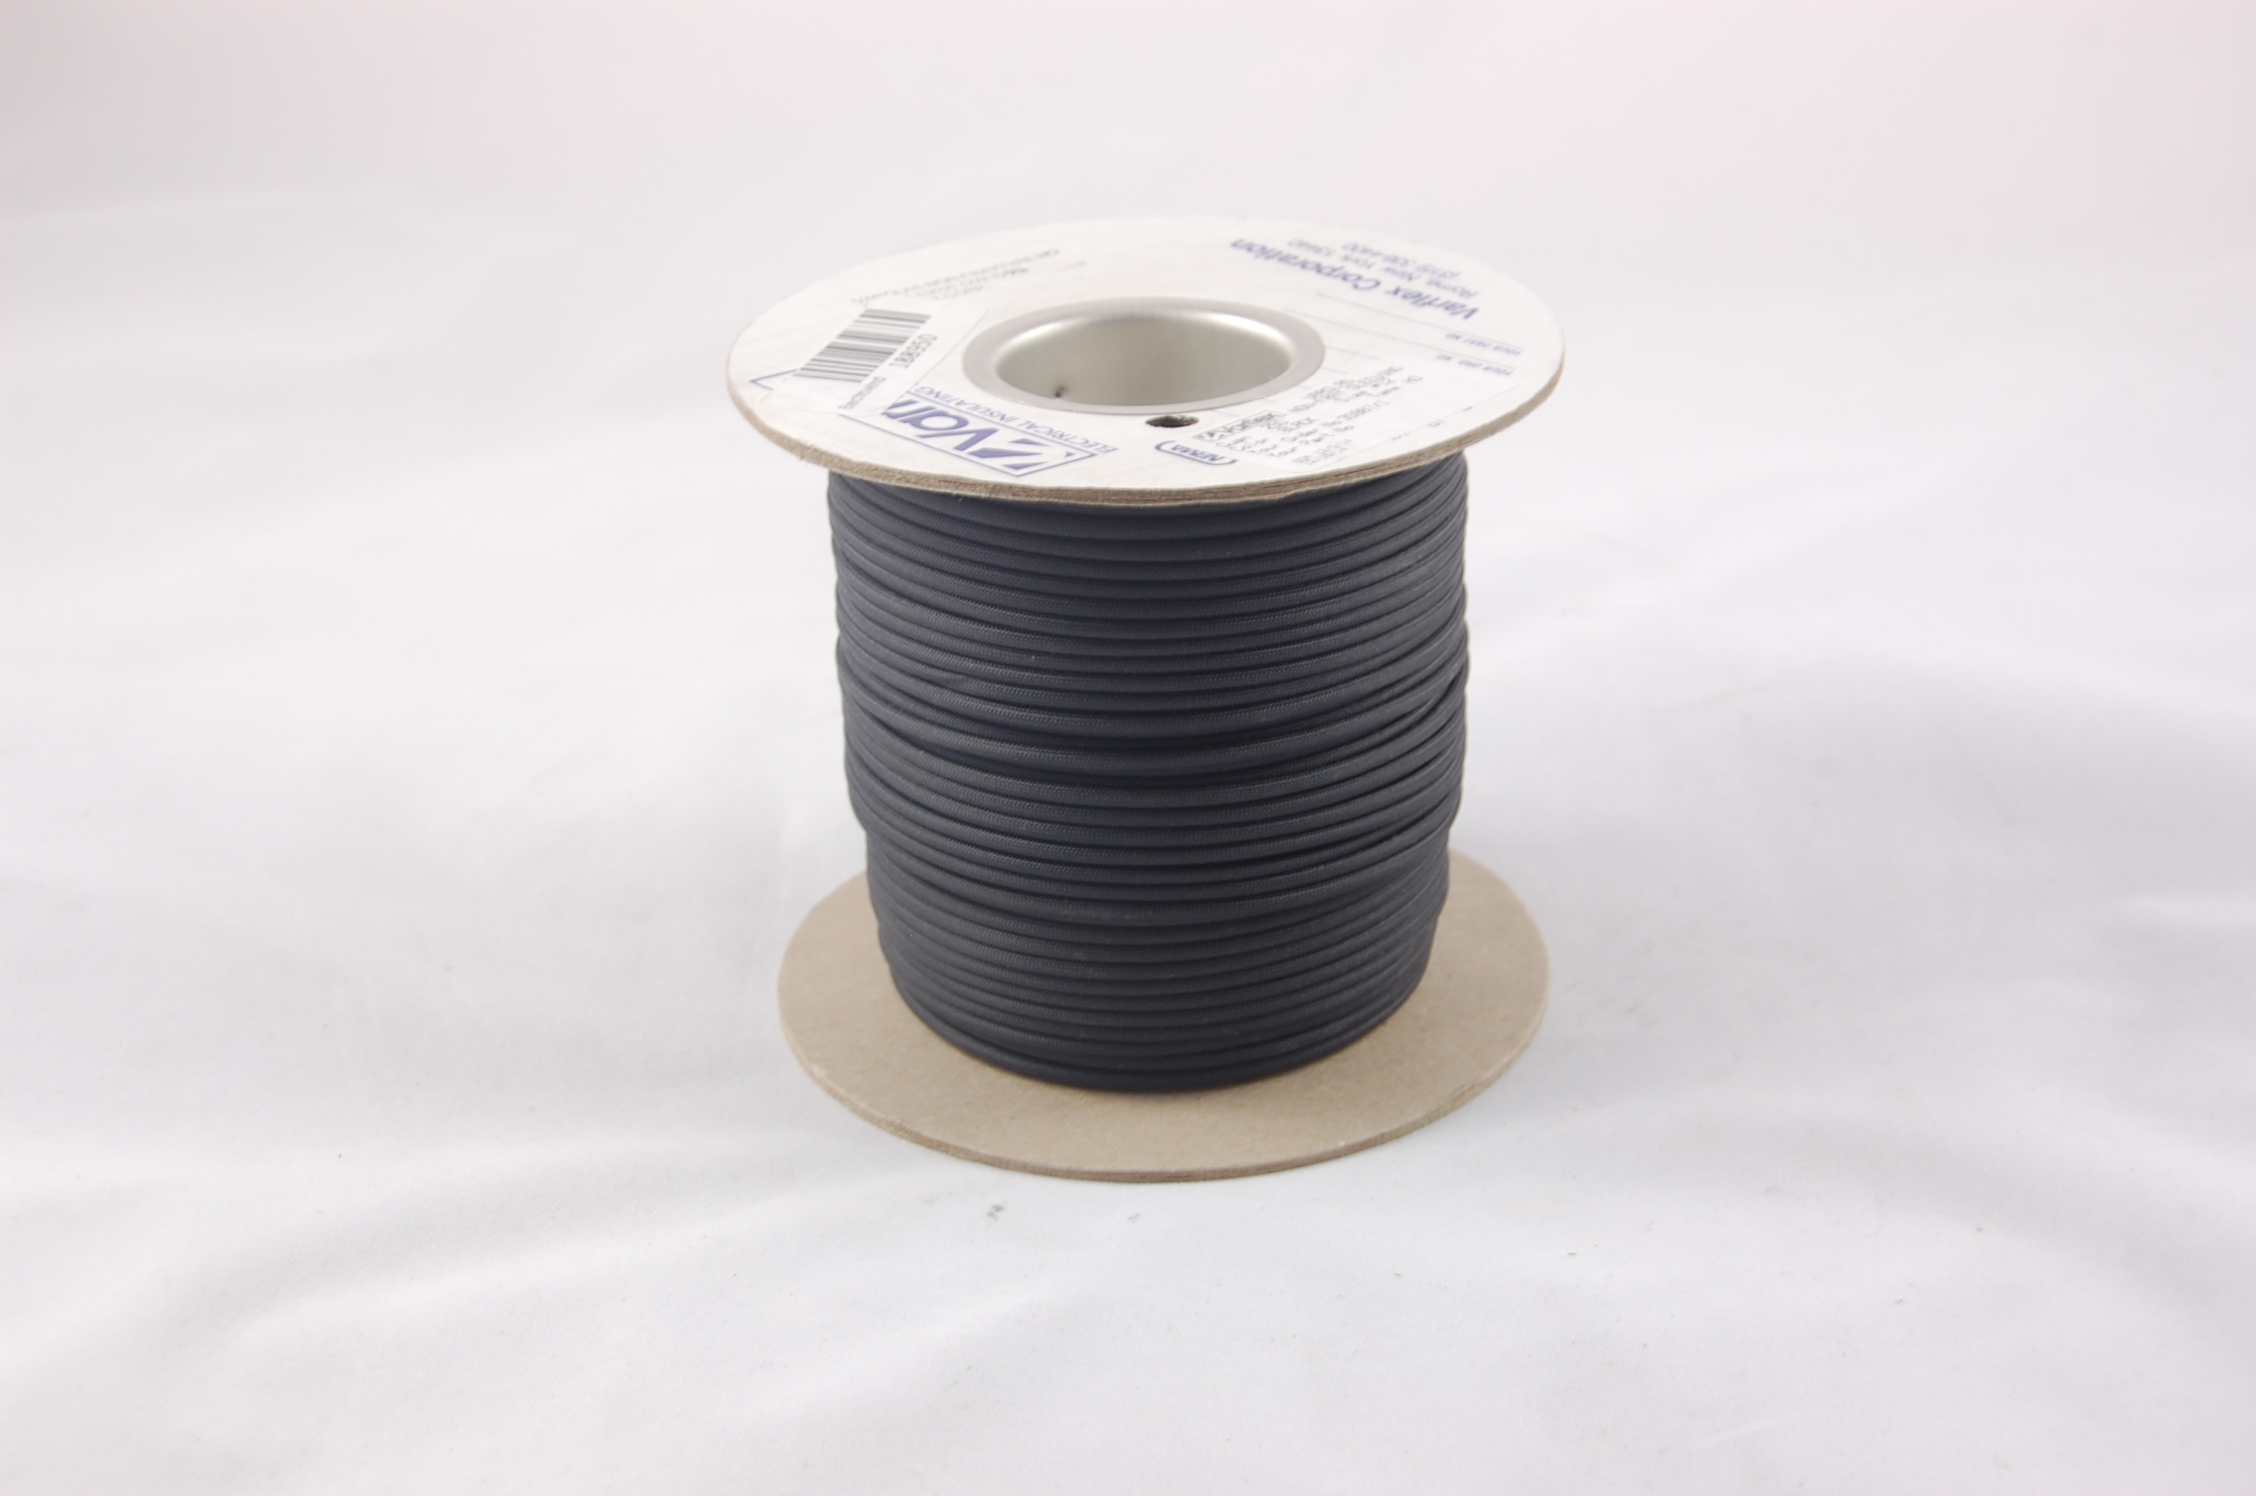 #0 AWG Varglas Type HO Heat-Cleaned and Treated High Temperature Non-Fray Flexible Fiberglass Sleeving, black, 150 FT per spool